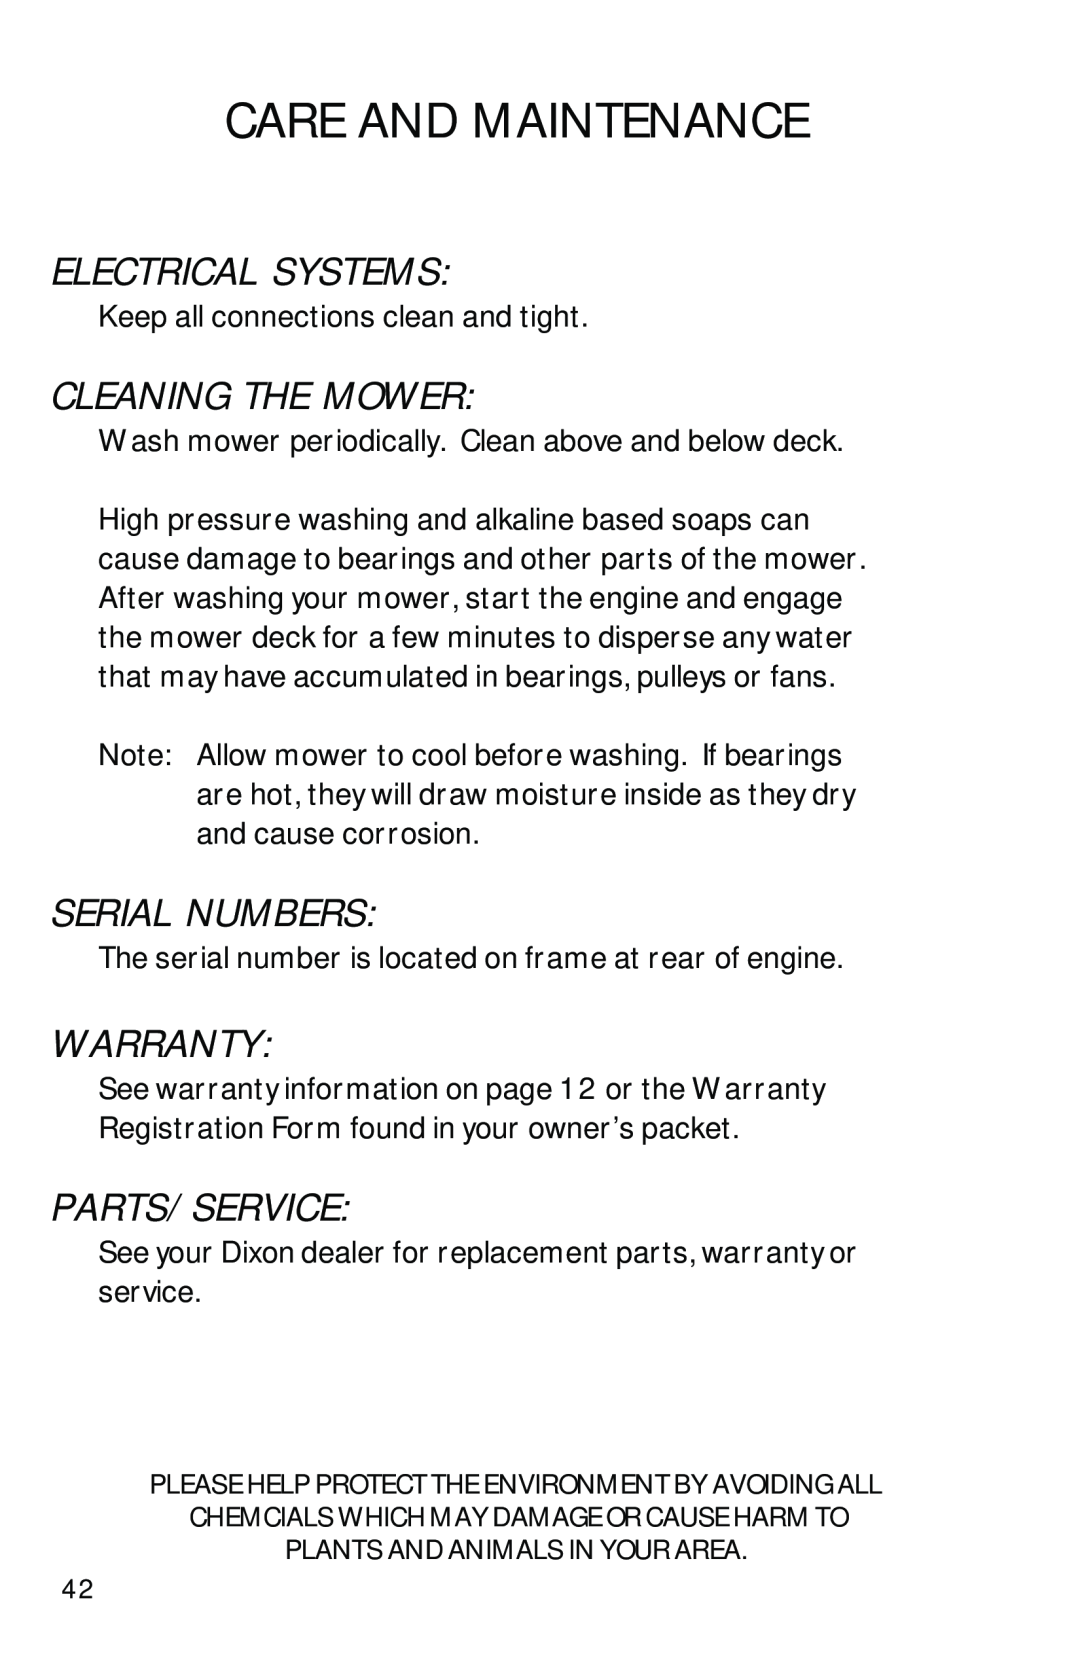 Dixon ZTR 2300 manual Electrical Systems, Cleaning The Mower, Serial Numbers, Warranty, Parts/Service, Care And Maintenance 